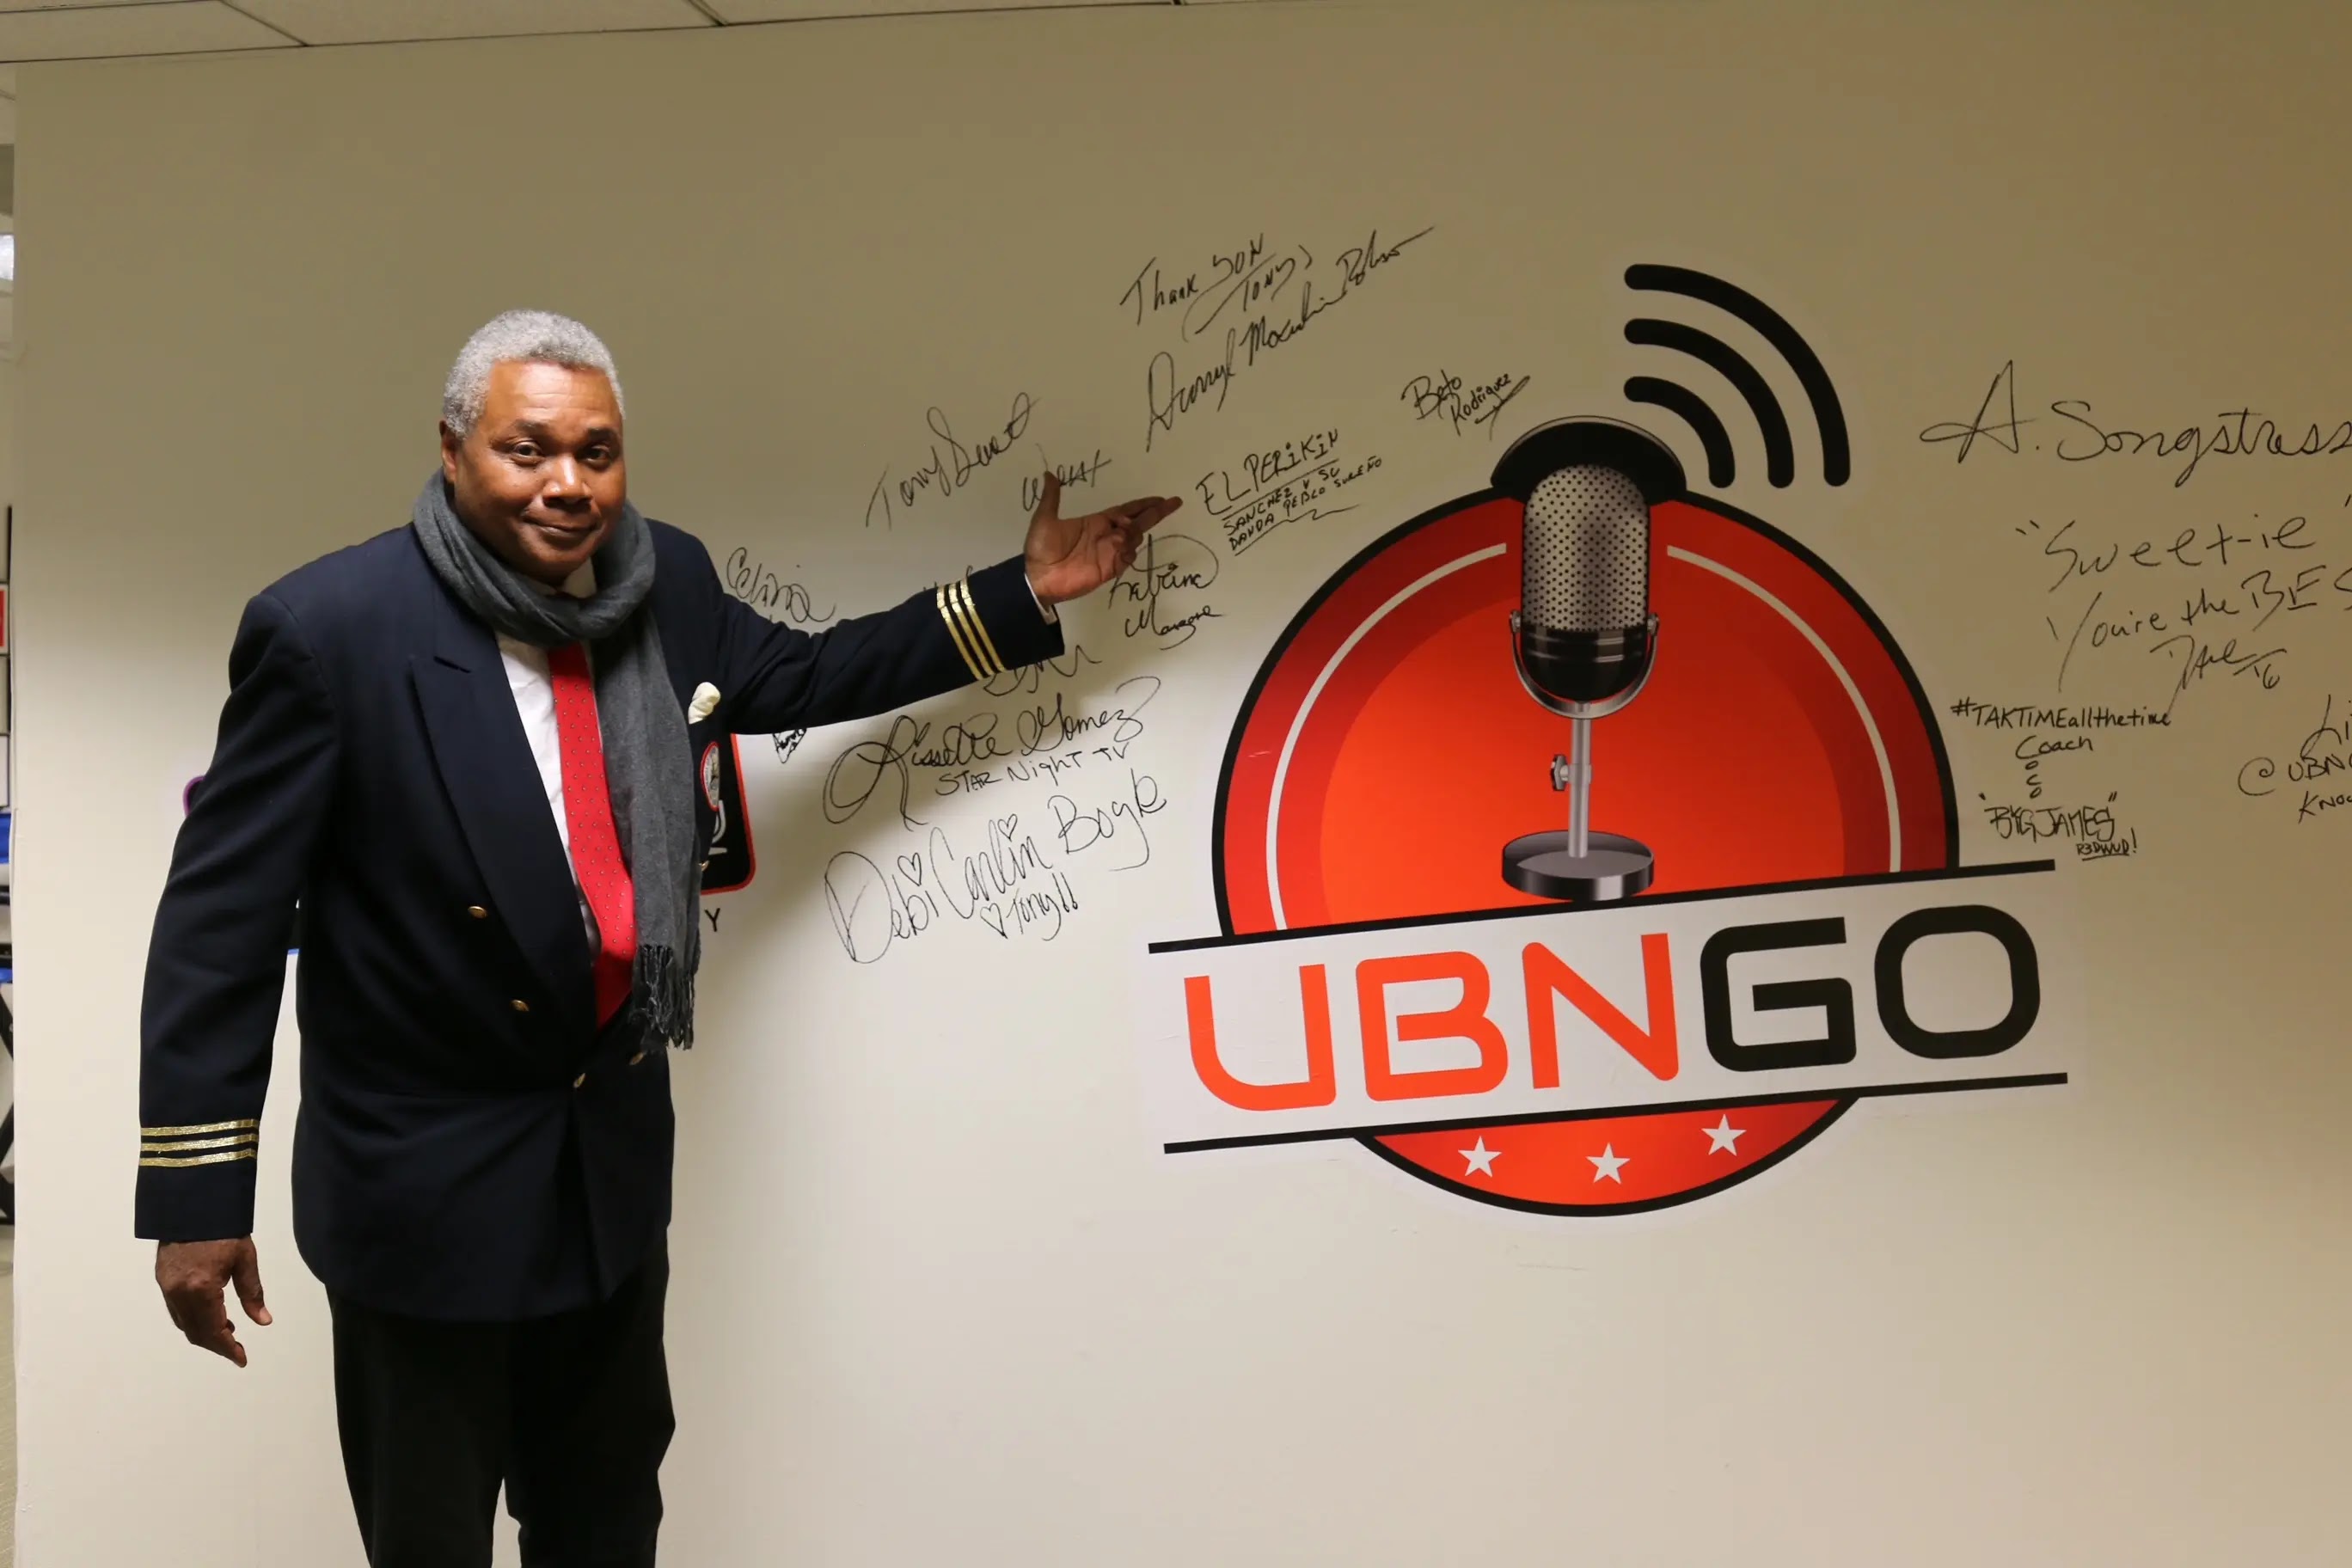 Large Enough For Stage Folks To Read: April 18, 2022 Guest Actor on Ep. 8.16 of The Actors Choice, Darryl Maximilian Robinson was delighted to autograph the UBNGO Studio wall in Hollywood.